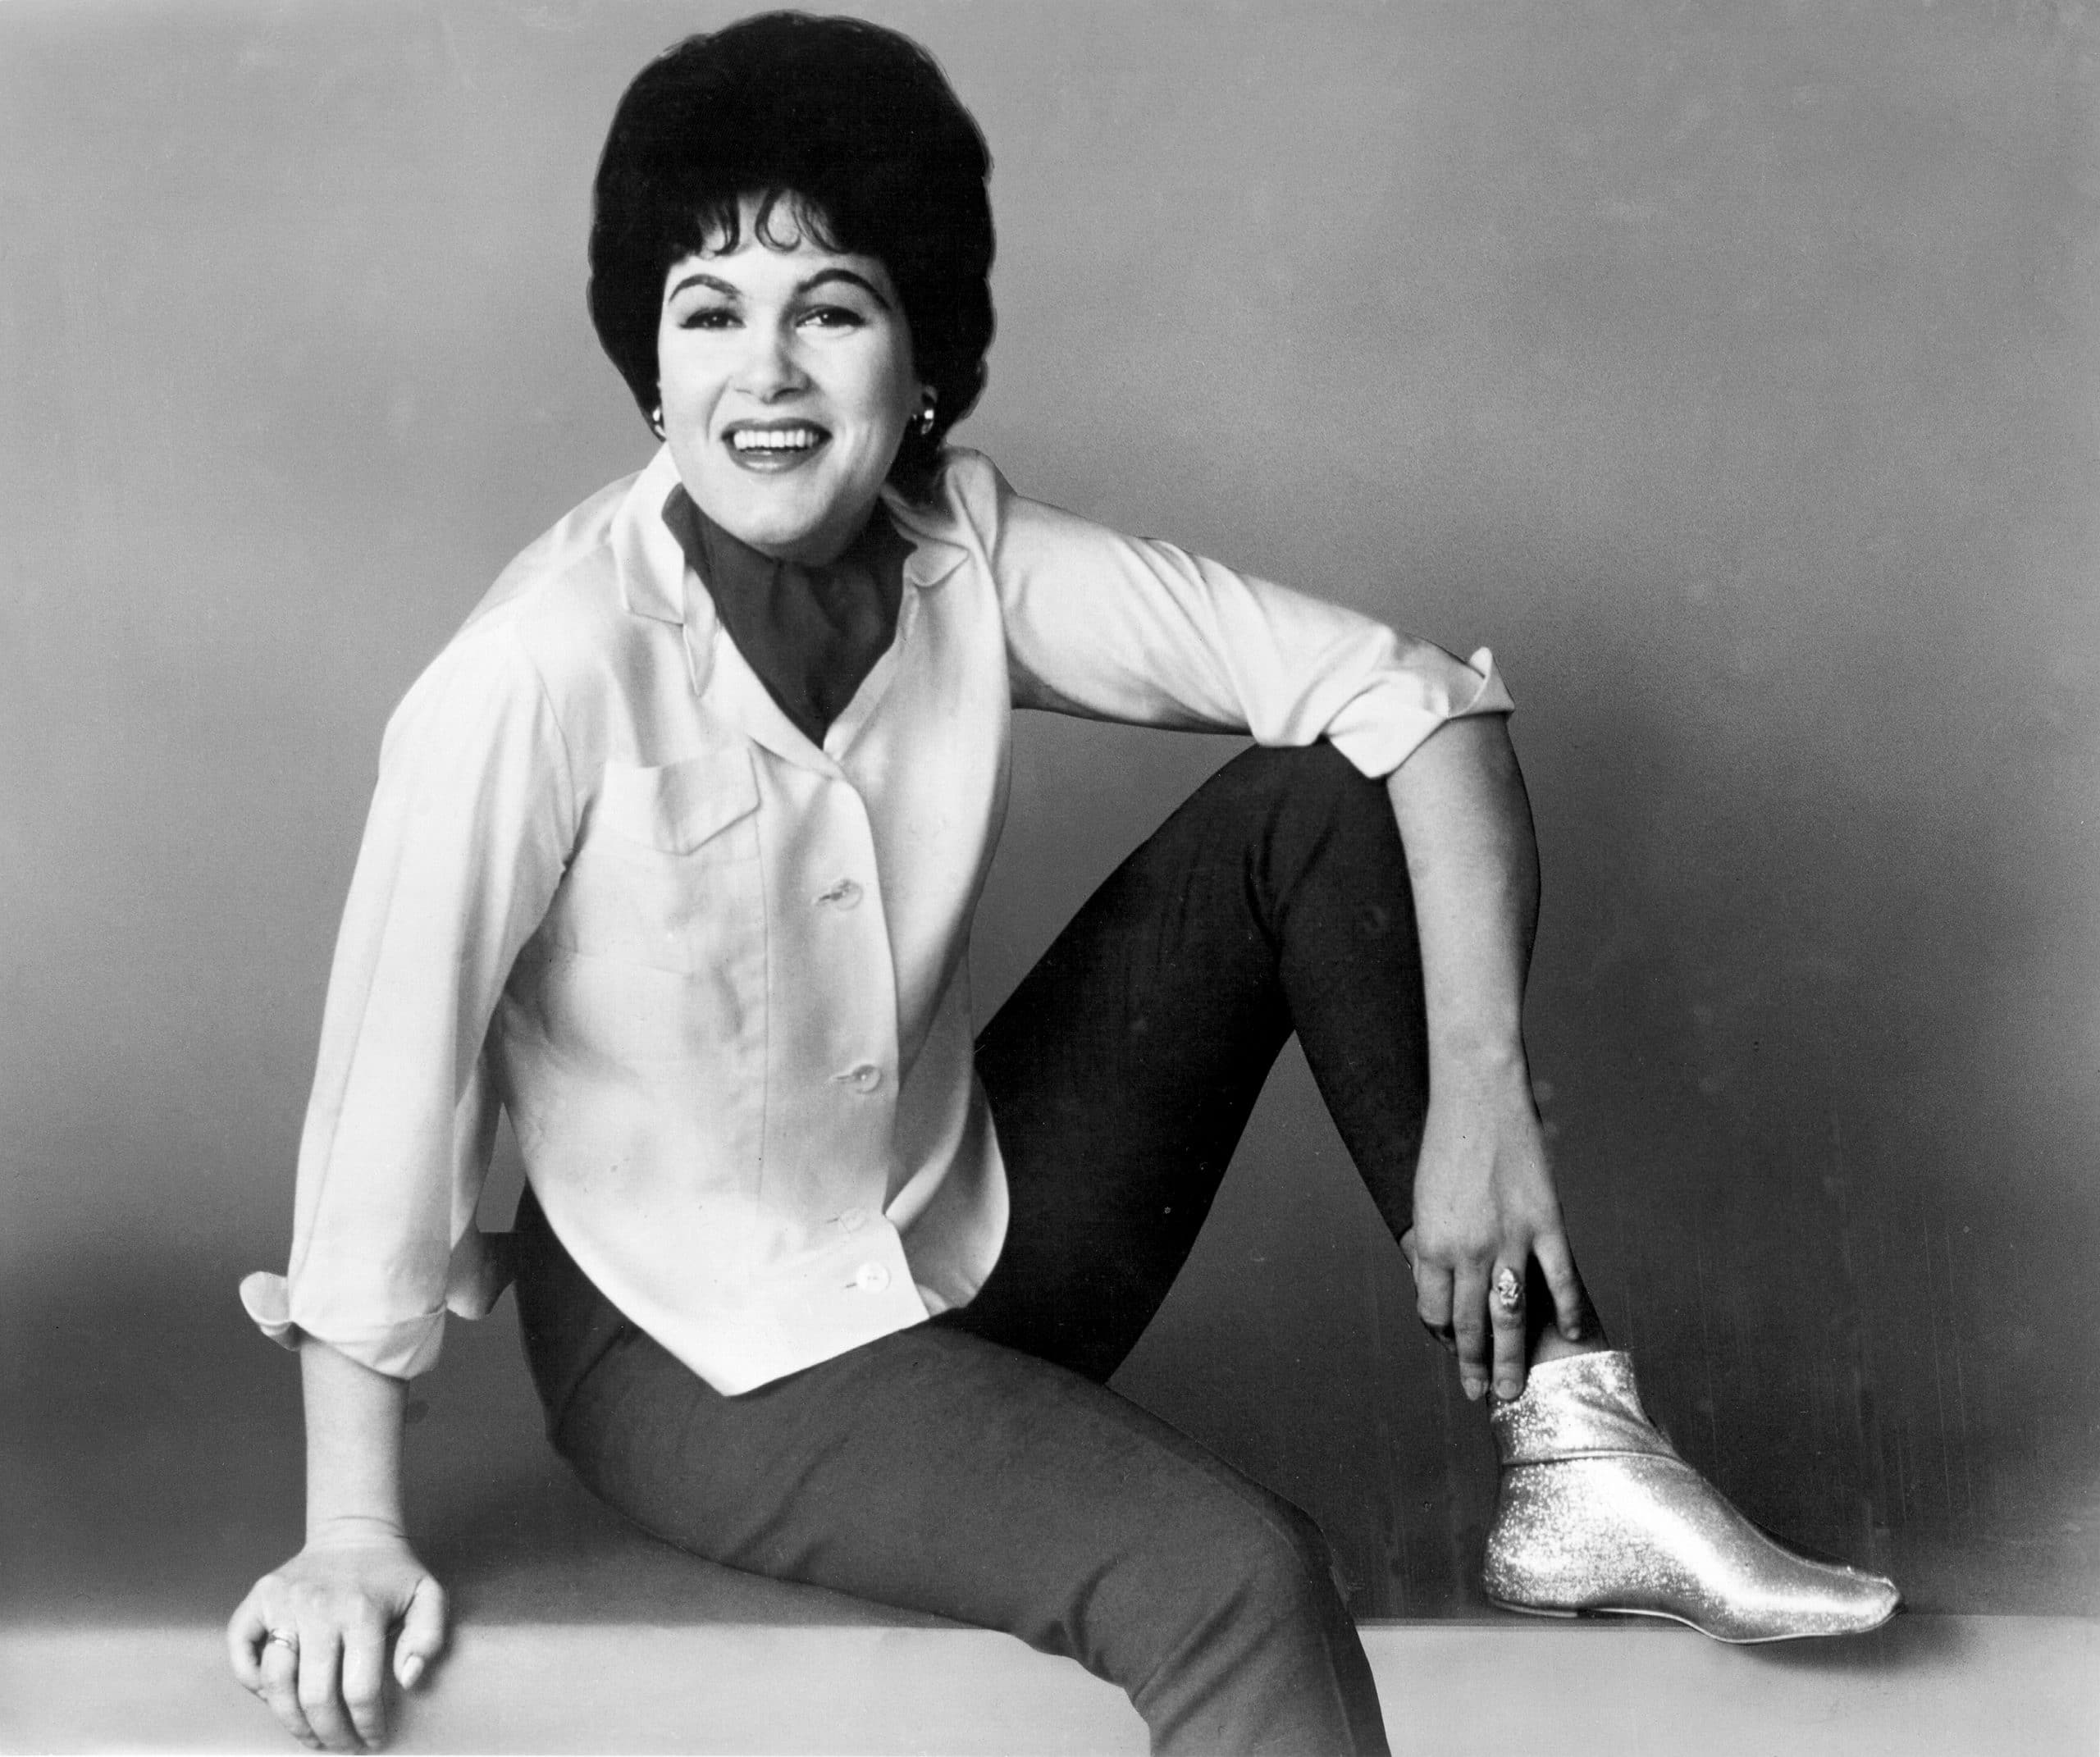 UNSPECIFIED - CIRCA 1970:  Photo of Patsy Cline